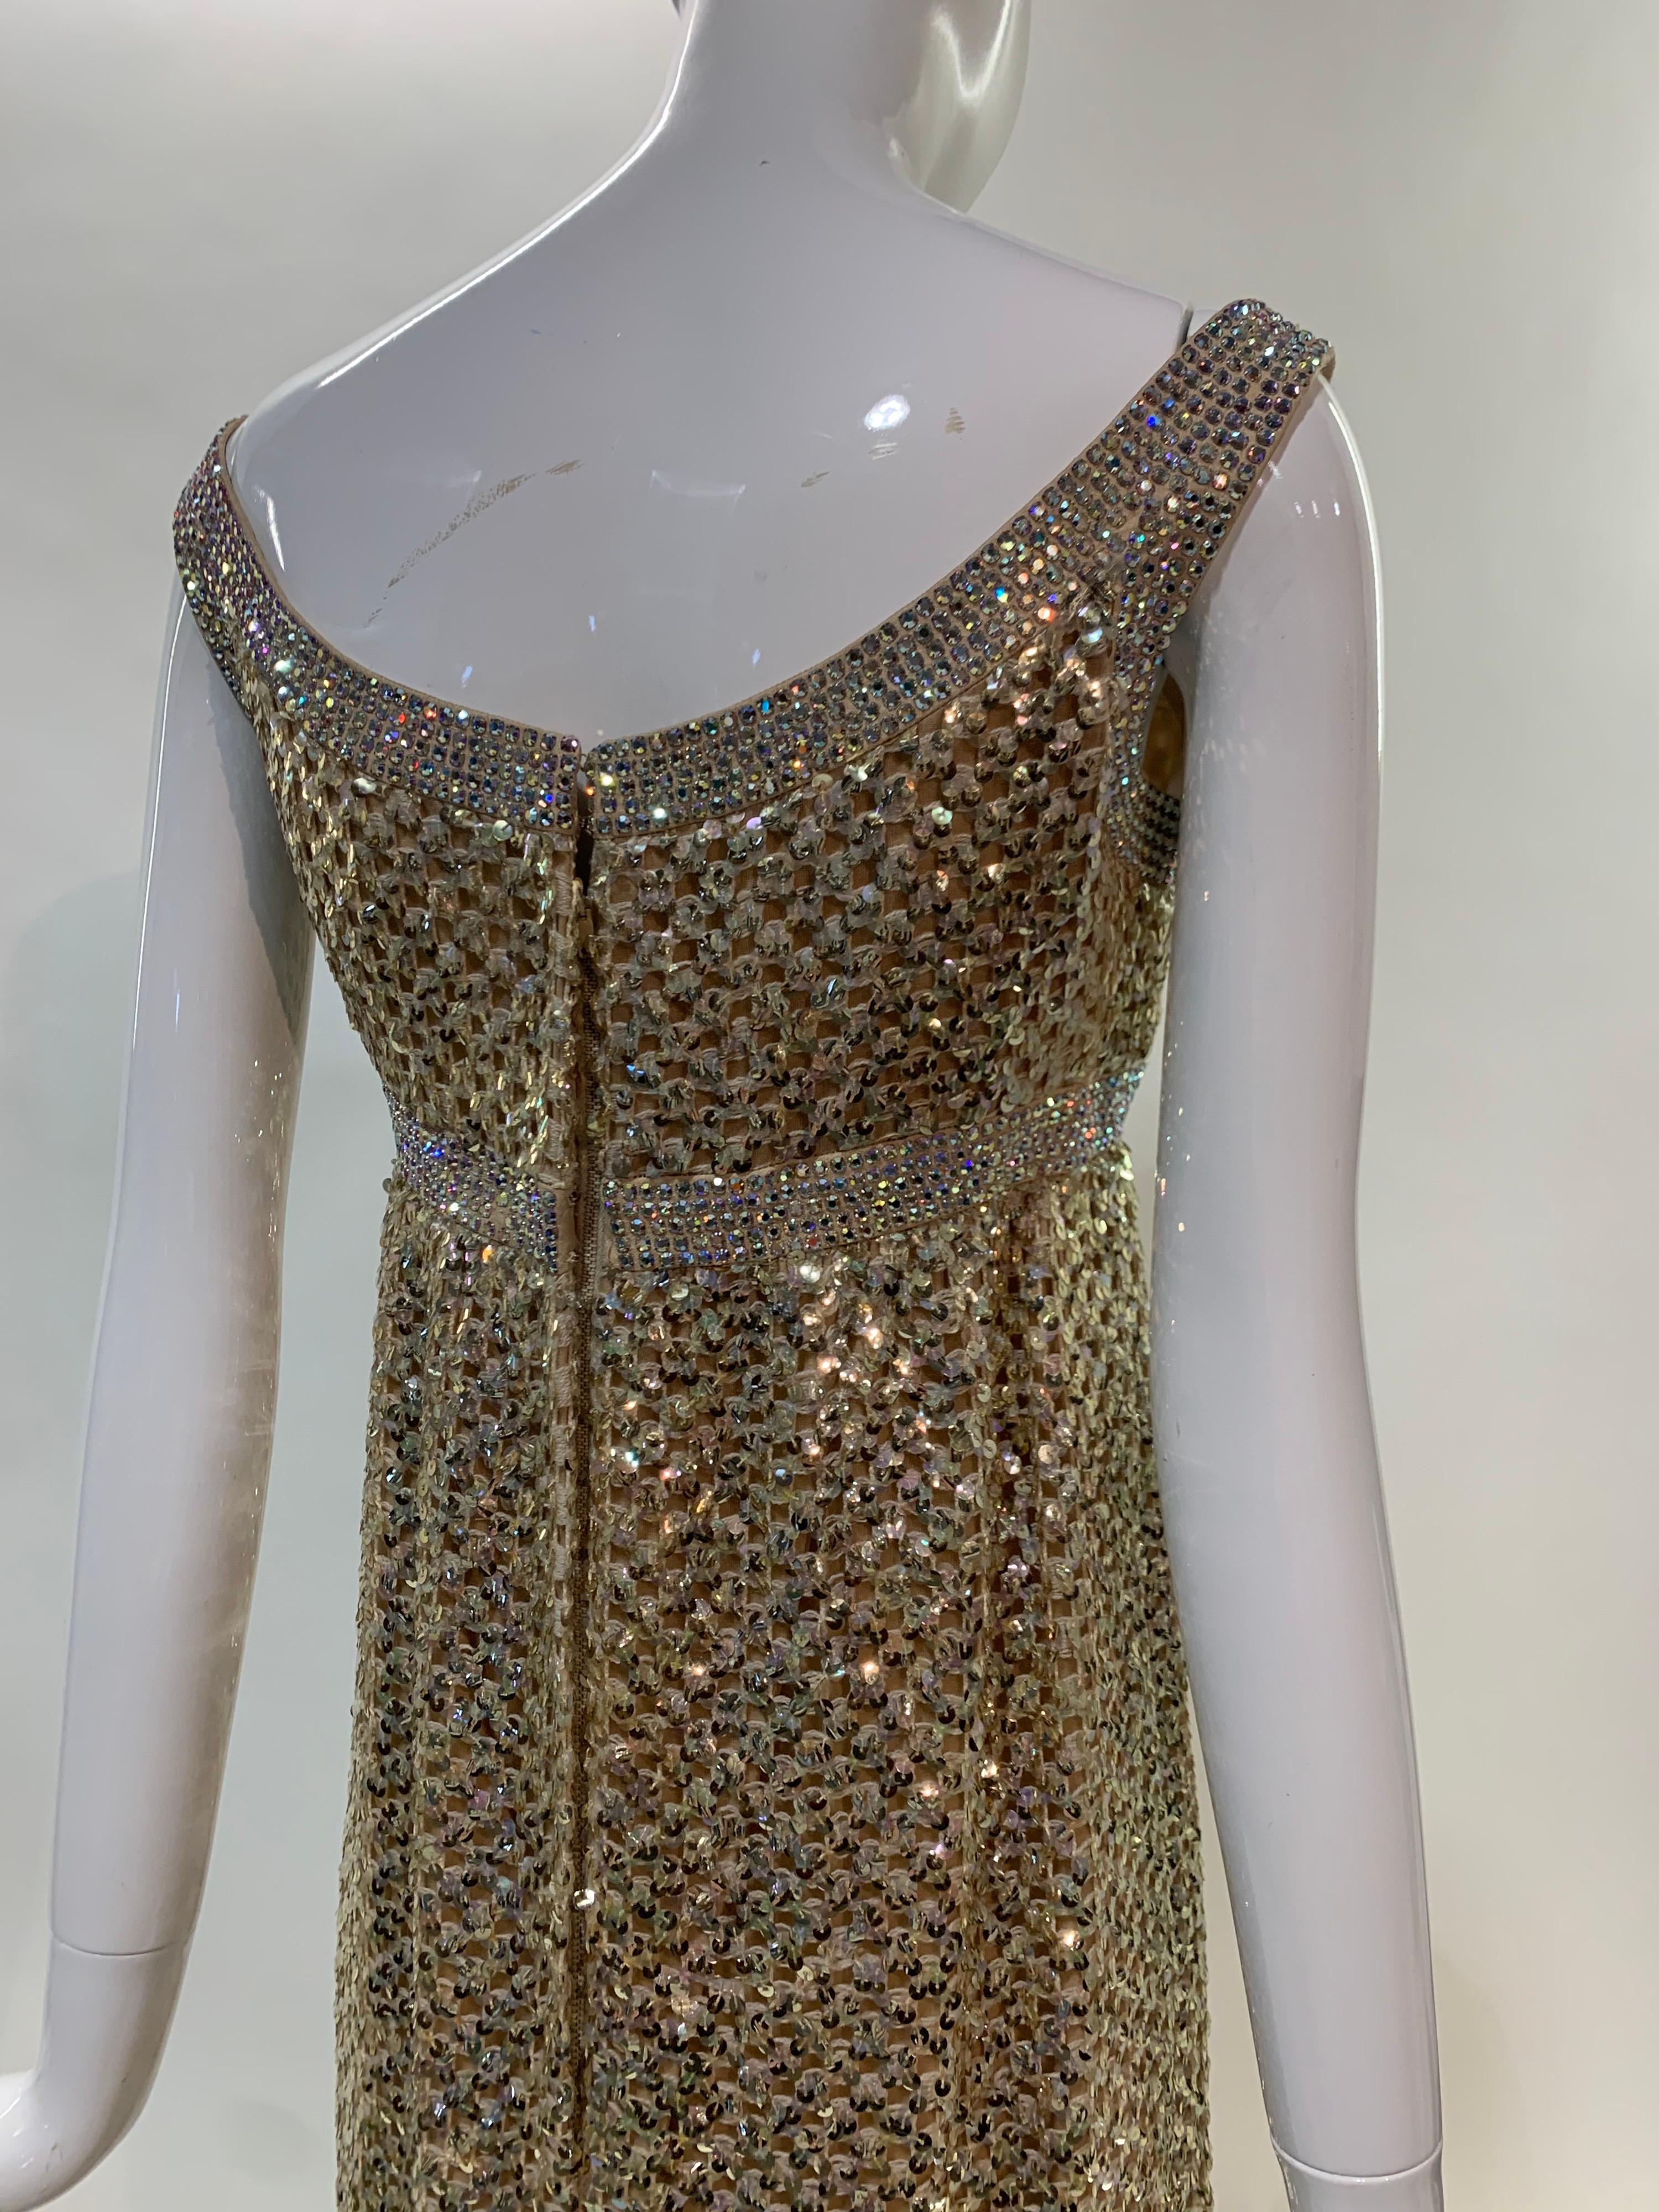 1960s Mod Empire Waist Gown in Gold Sequin Lattice and Iridescent Rhinestones For Sale 6